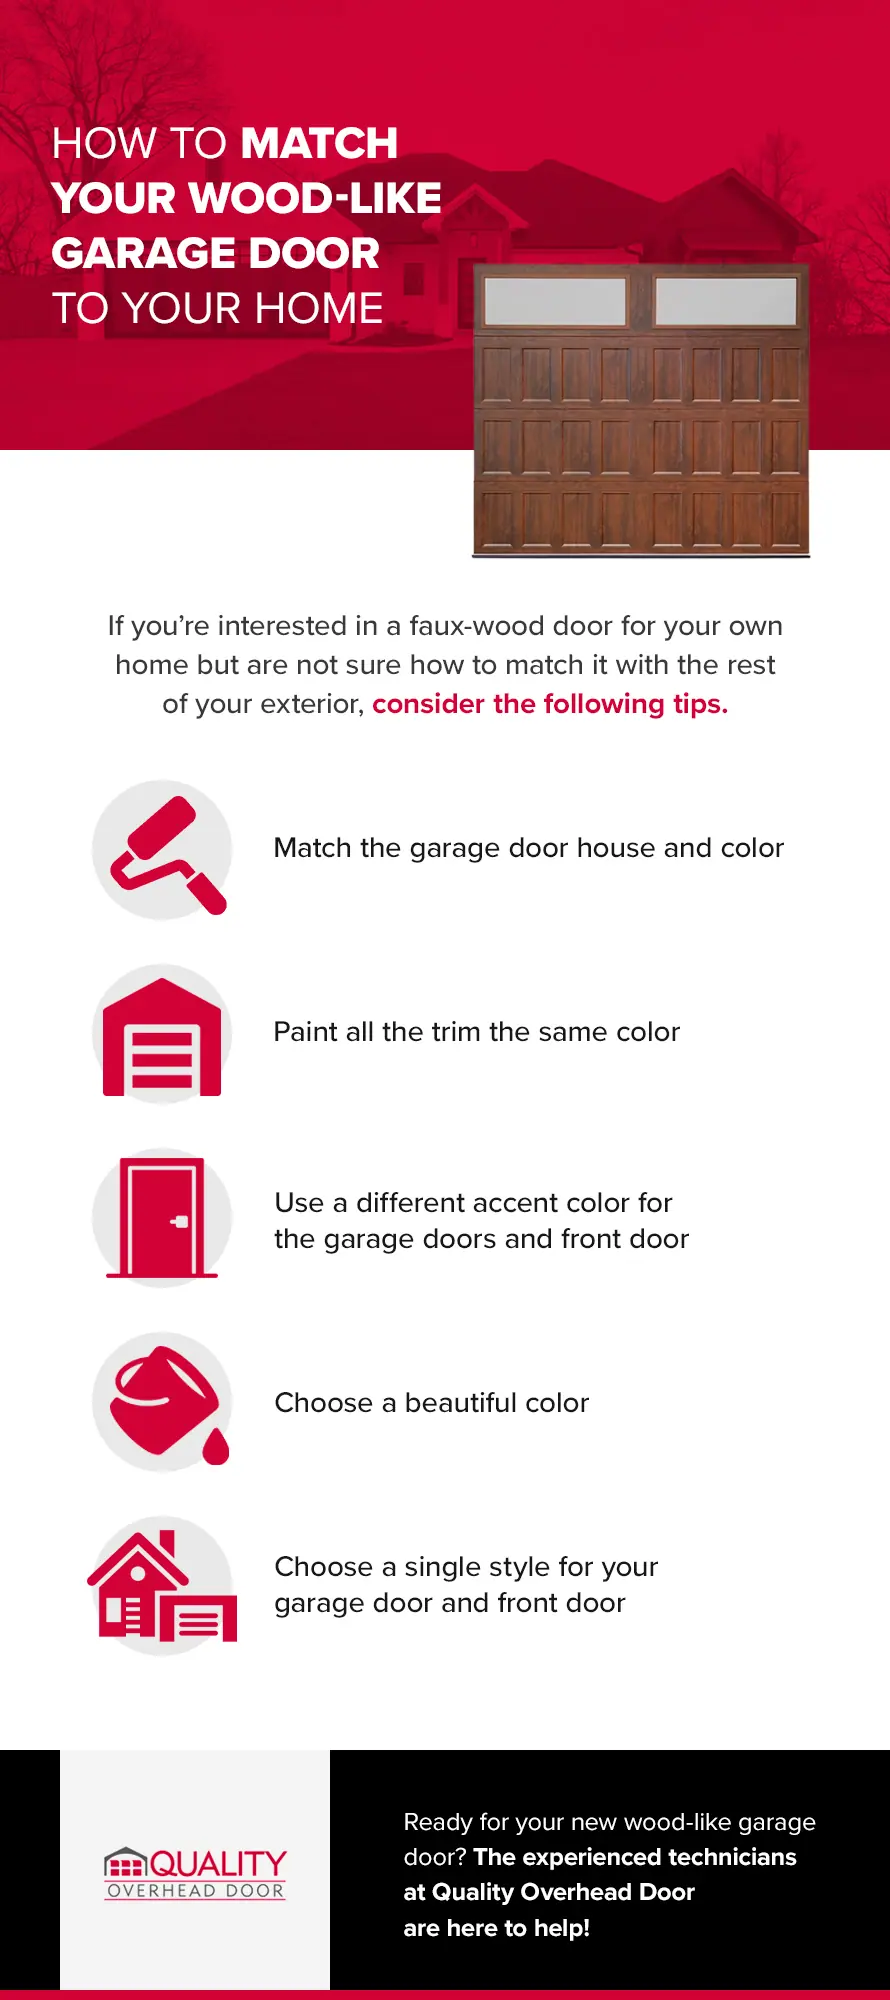 How to match your wood-like garage door to your home micrographic. If you’re interested in a faux-wood door for your own home but are not sure how to match it with the rest of your exterior, consider these tips.